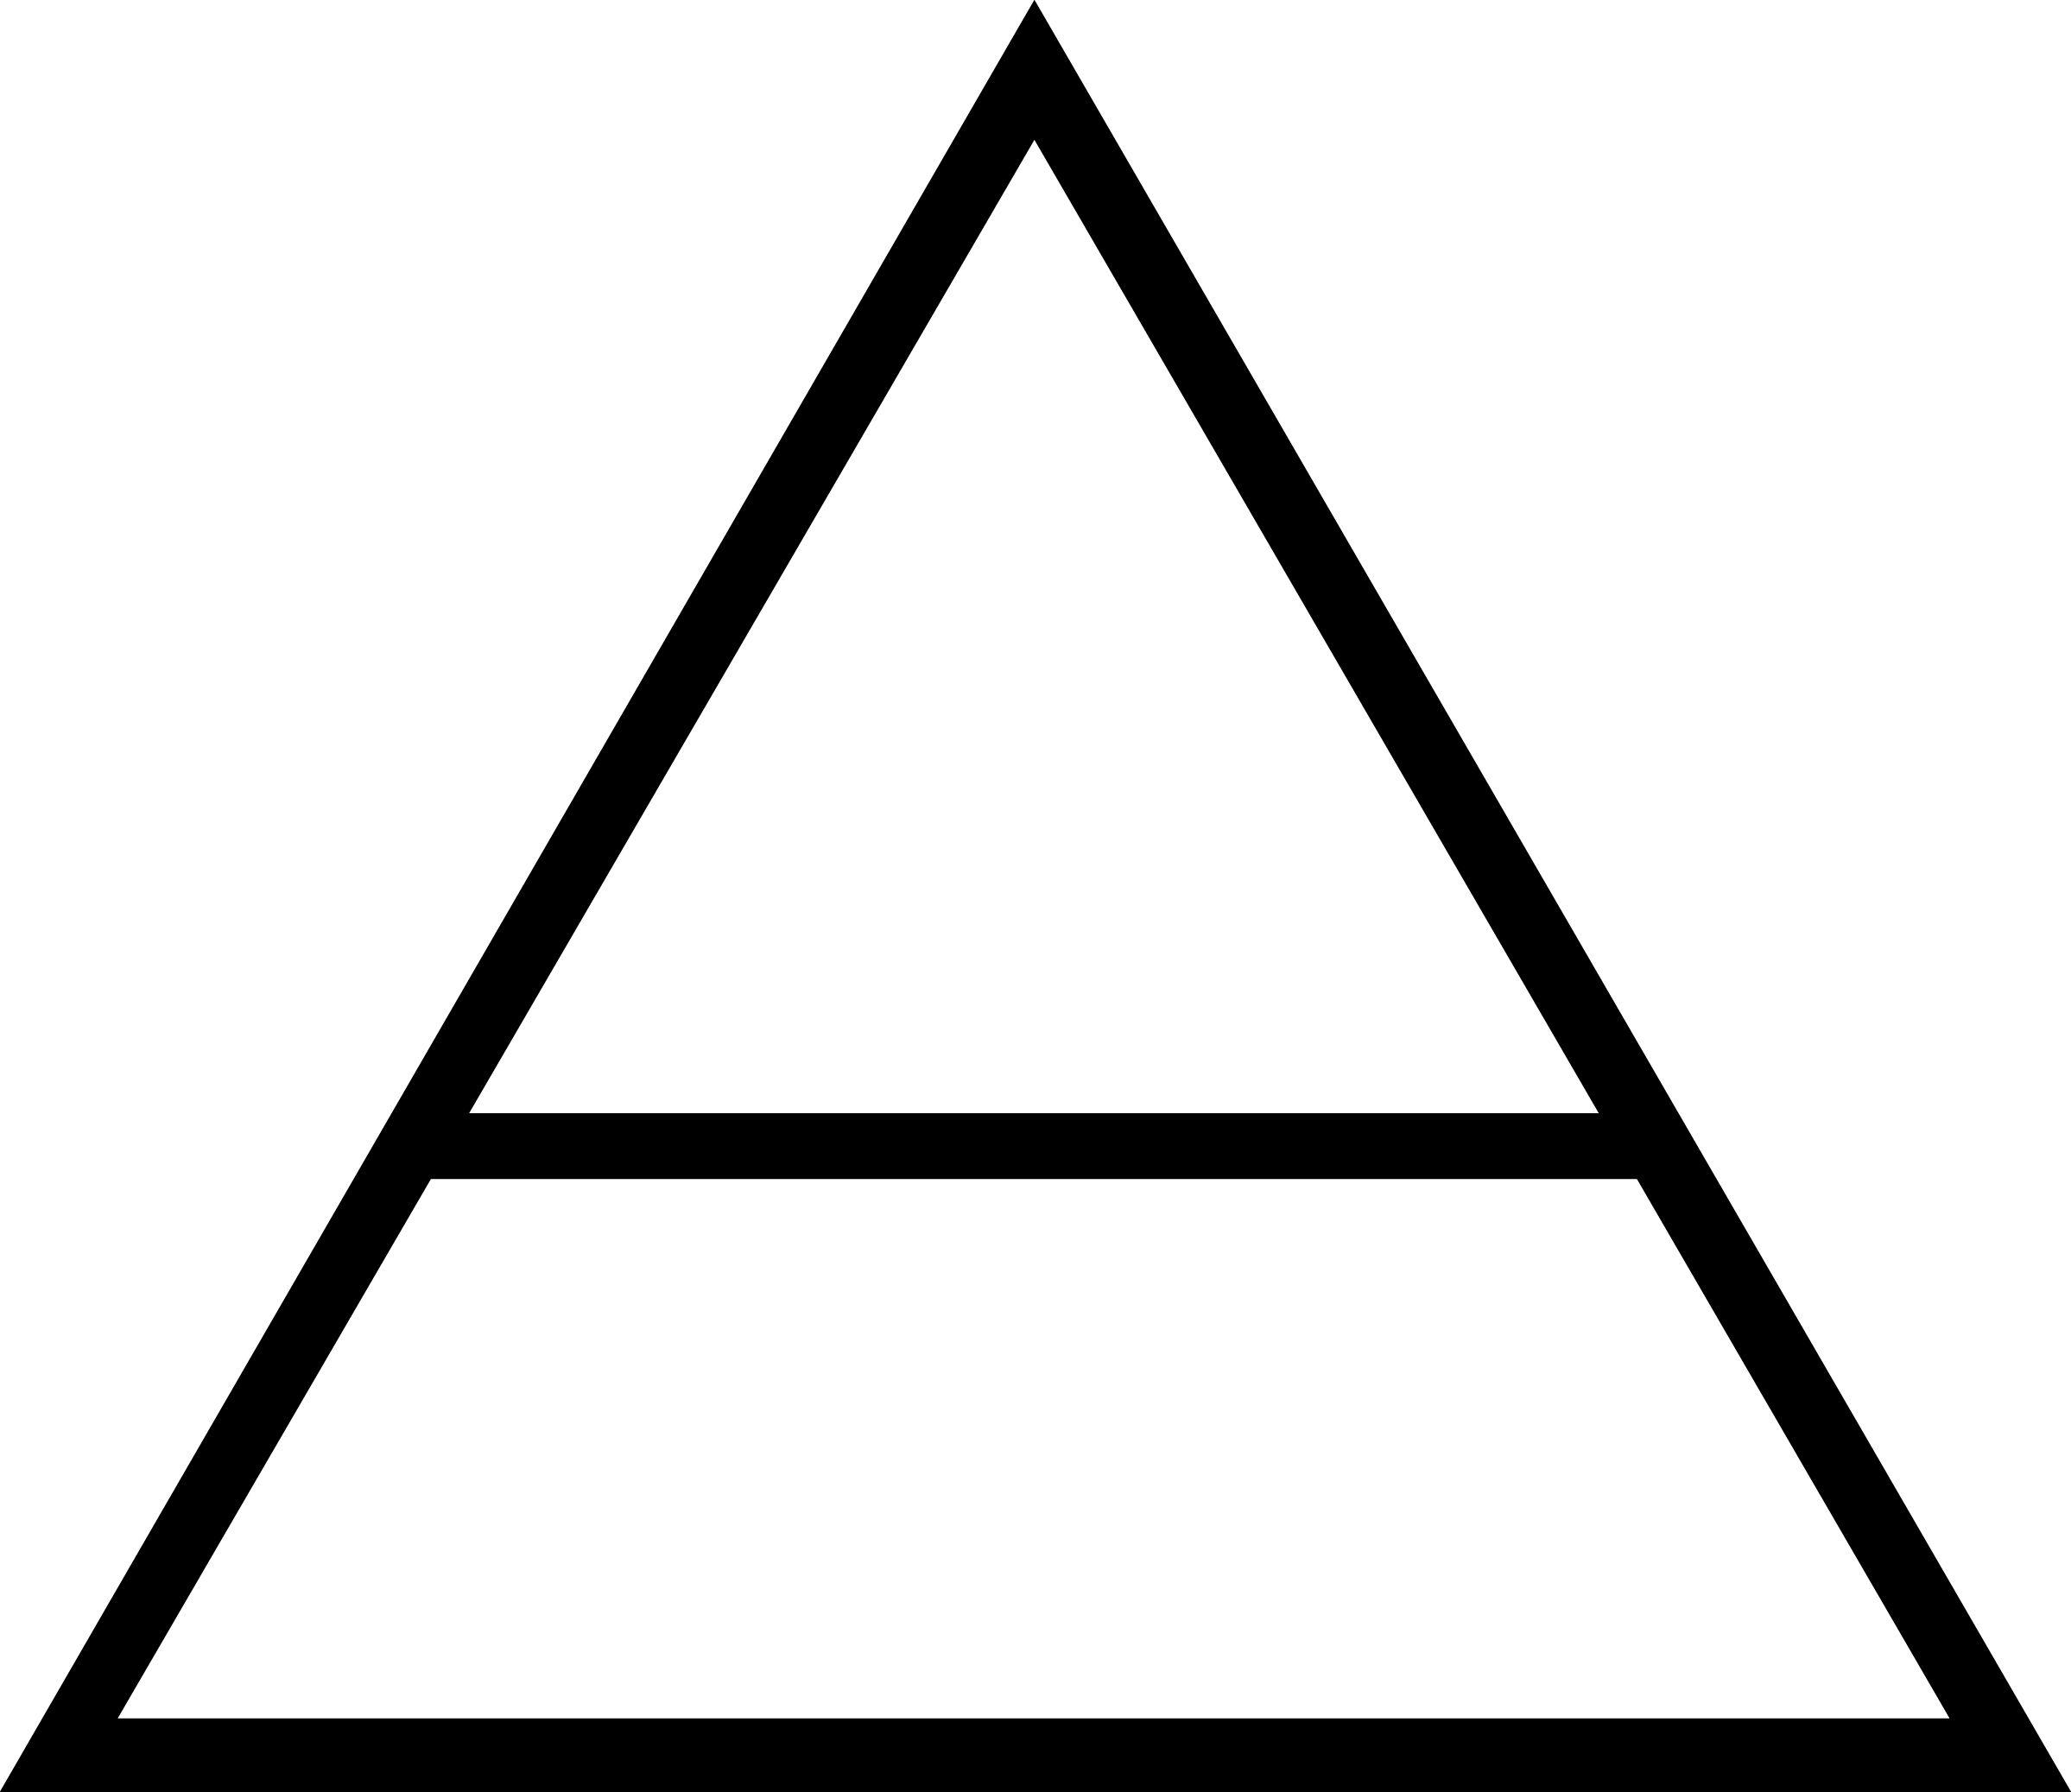 30 Seconds to Mars Logo - Seconds To Mars triad #reference #design. Jared. Mars, 30